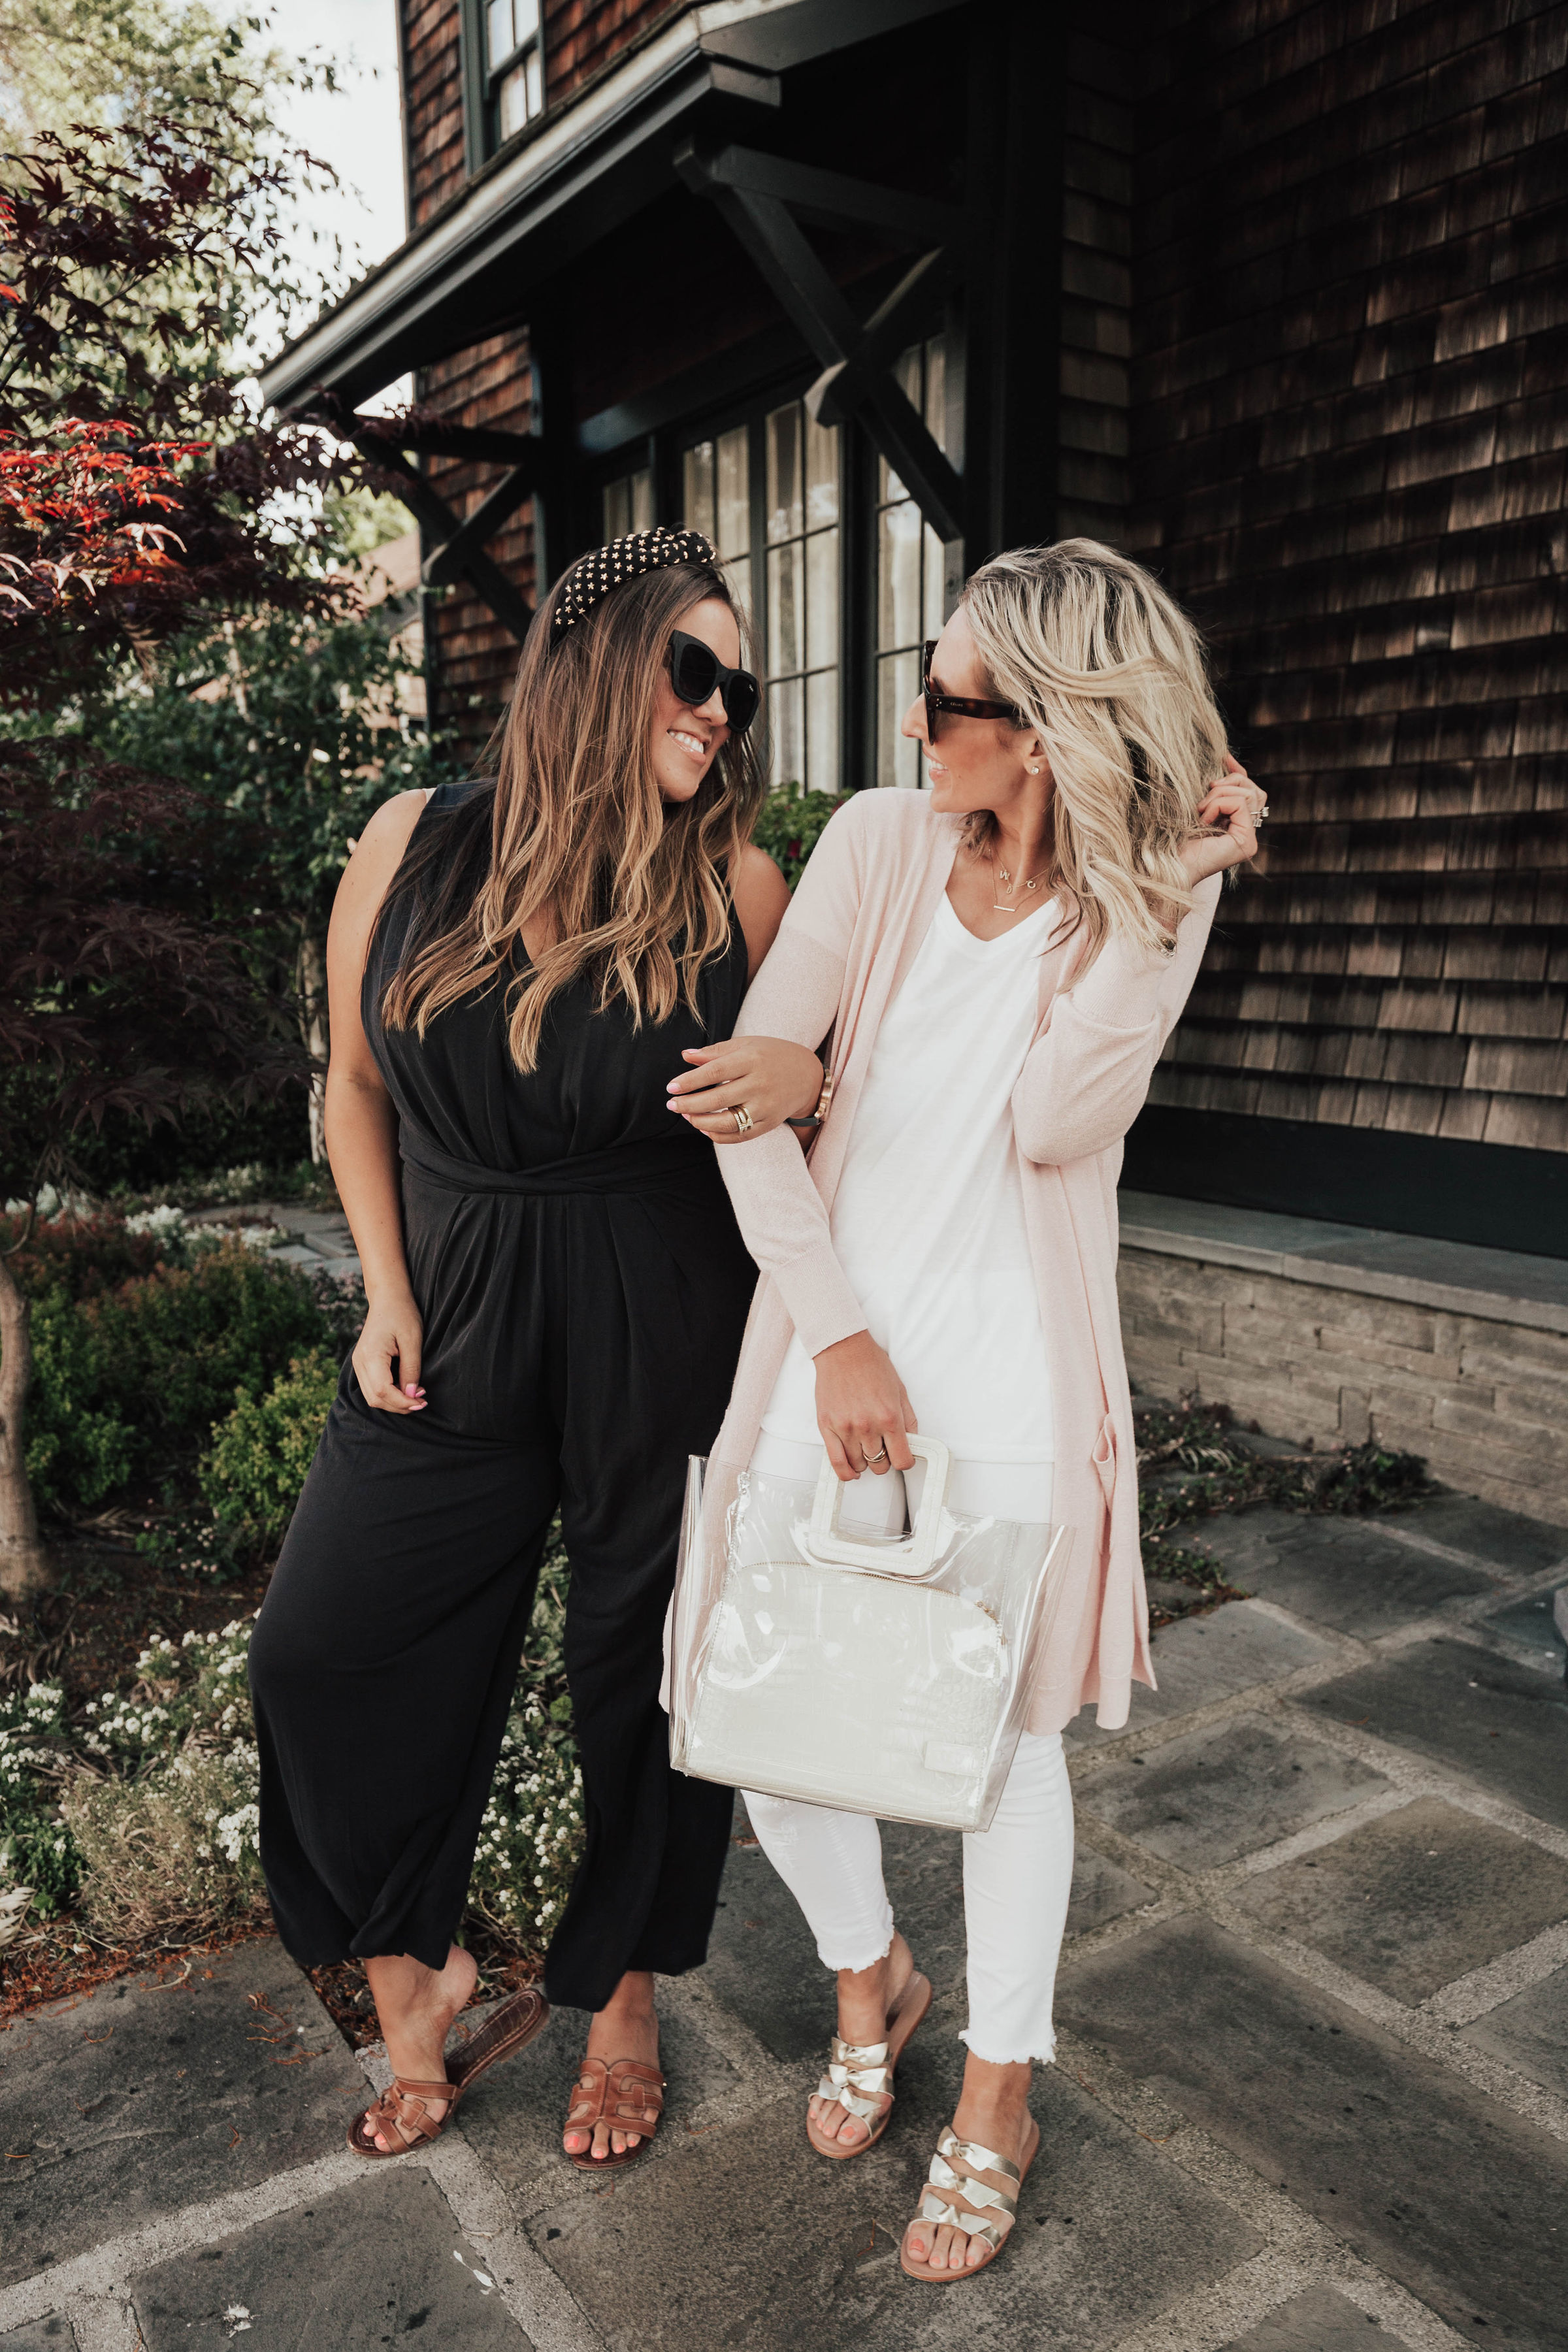 Bloggers Ashley Zeal and Emily Wieczorek from Two Peas in a Prada share their top ten trendy items for summer from Nordstrom.